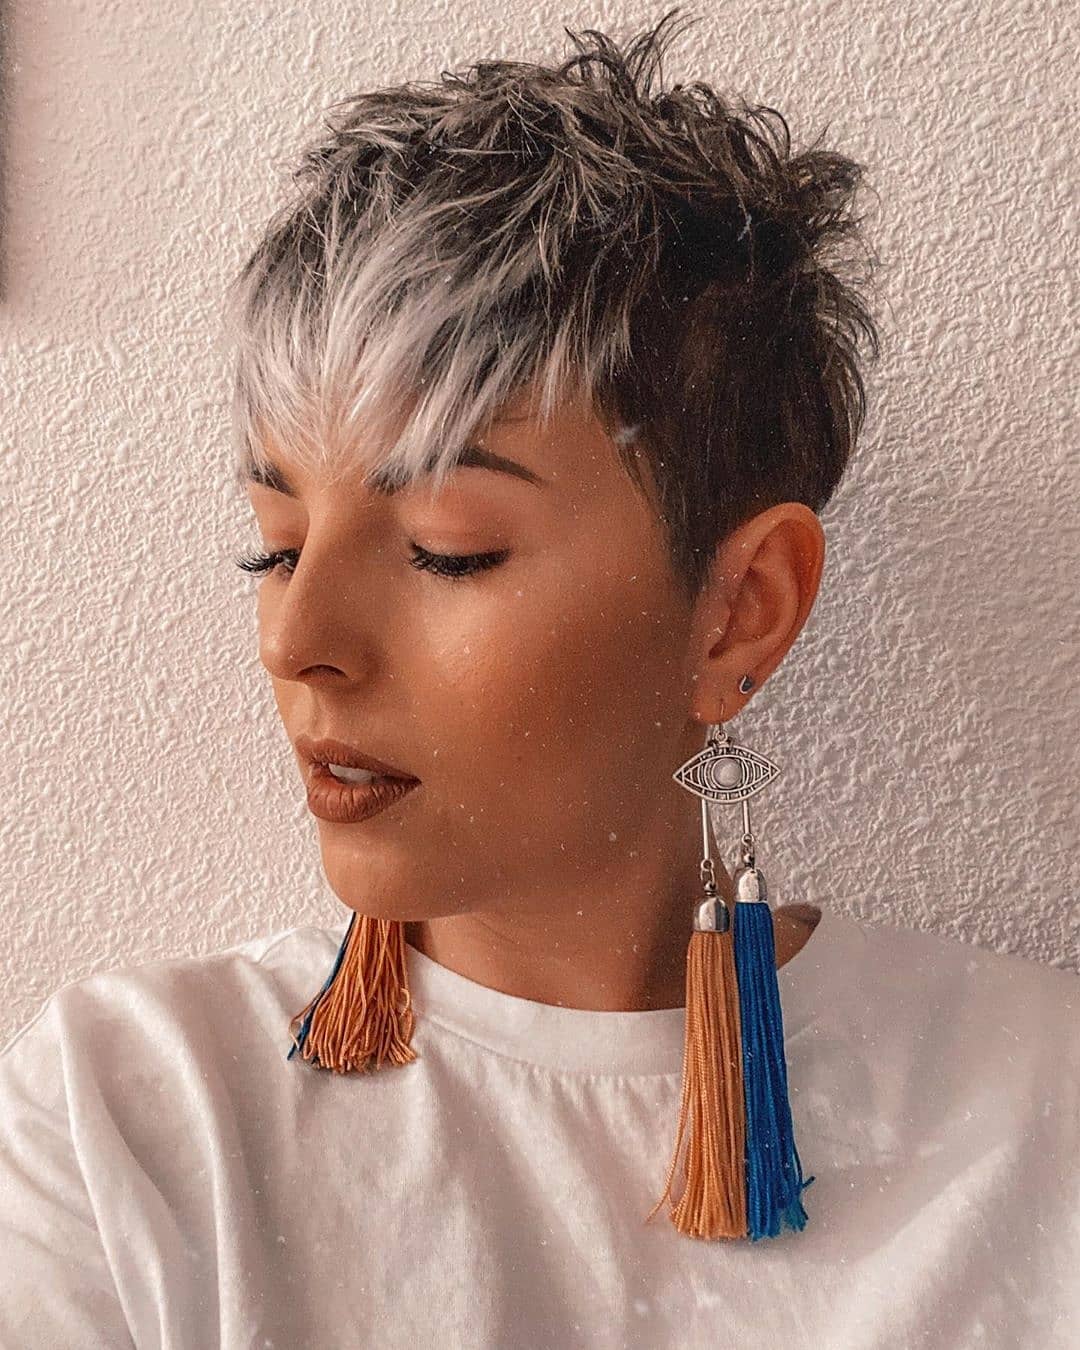 10 Easy Stylish Pixie Haircuts for Women - Short Pixie Hair Styles 2020